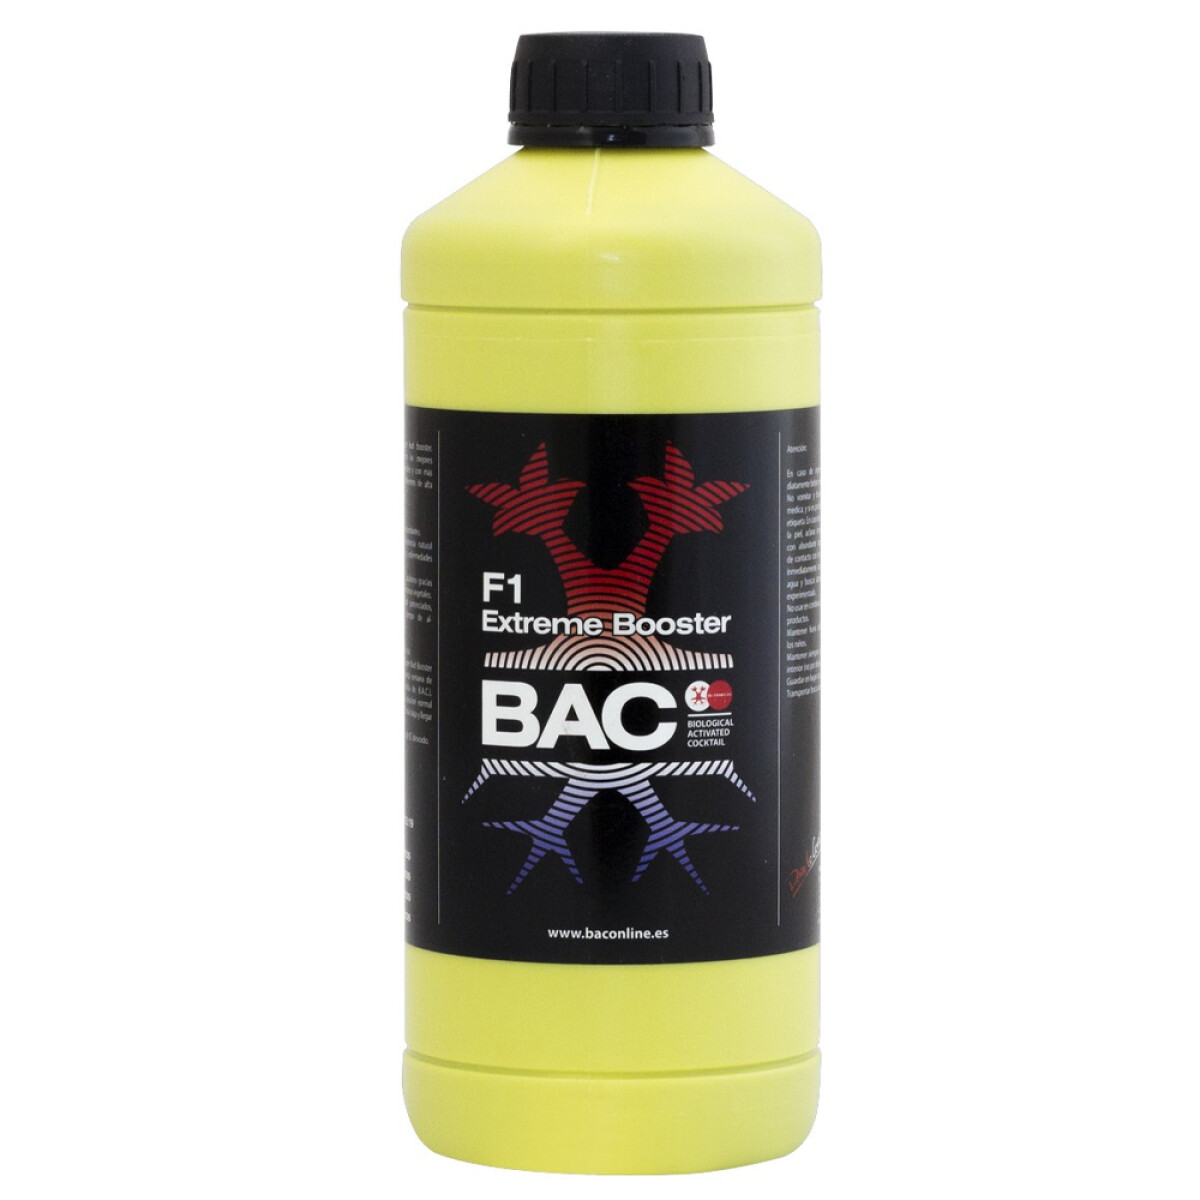 F1 EXTREME BOOSTER BAC - 1L 